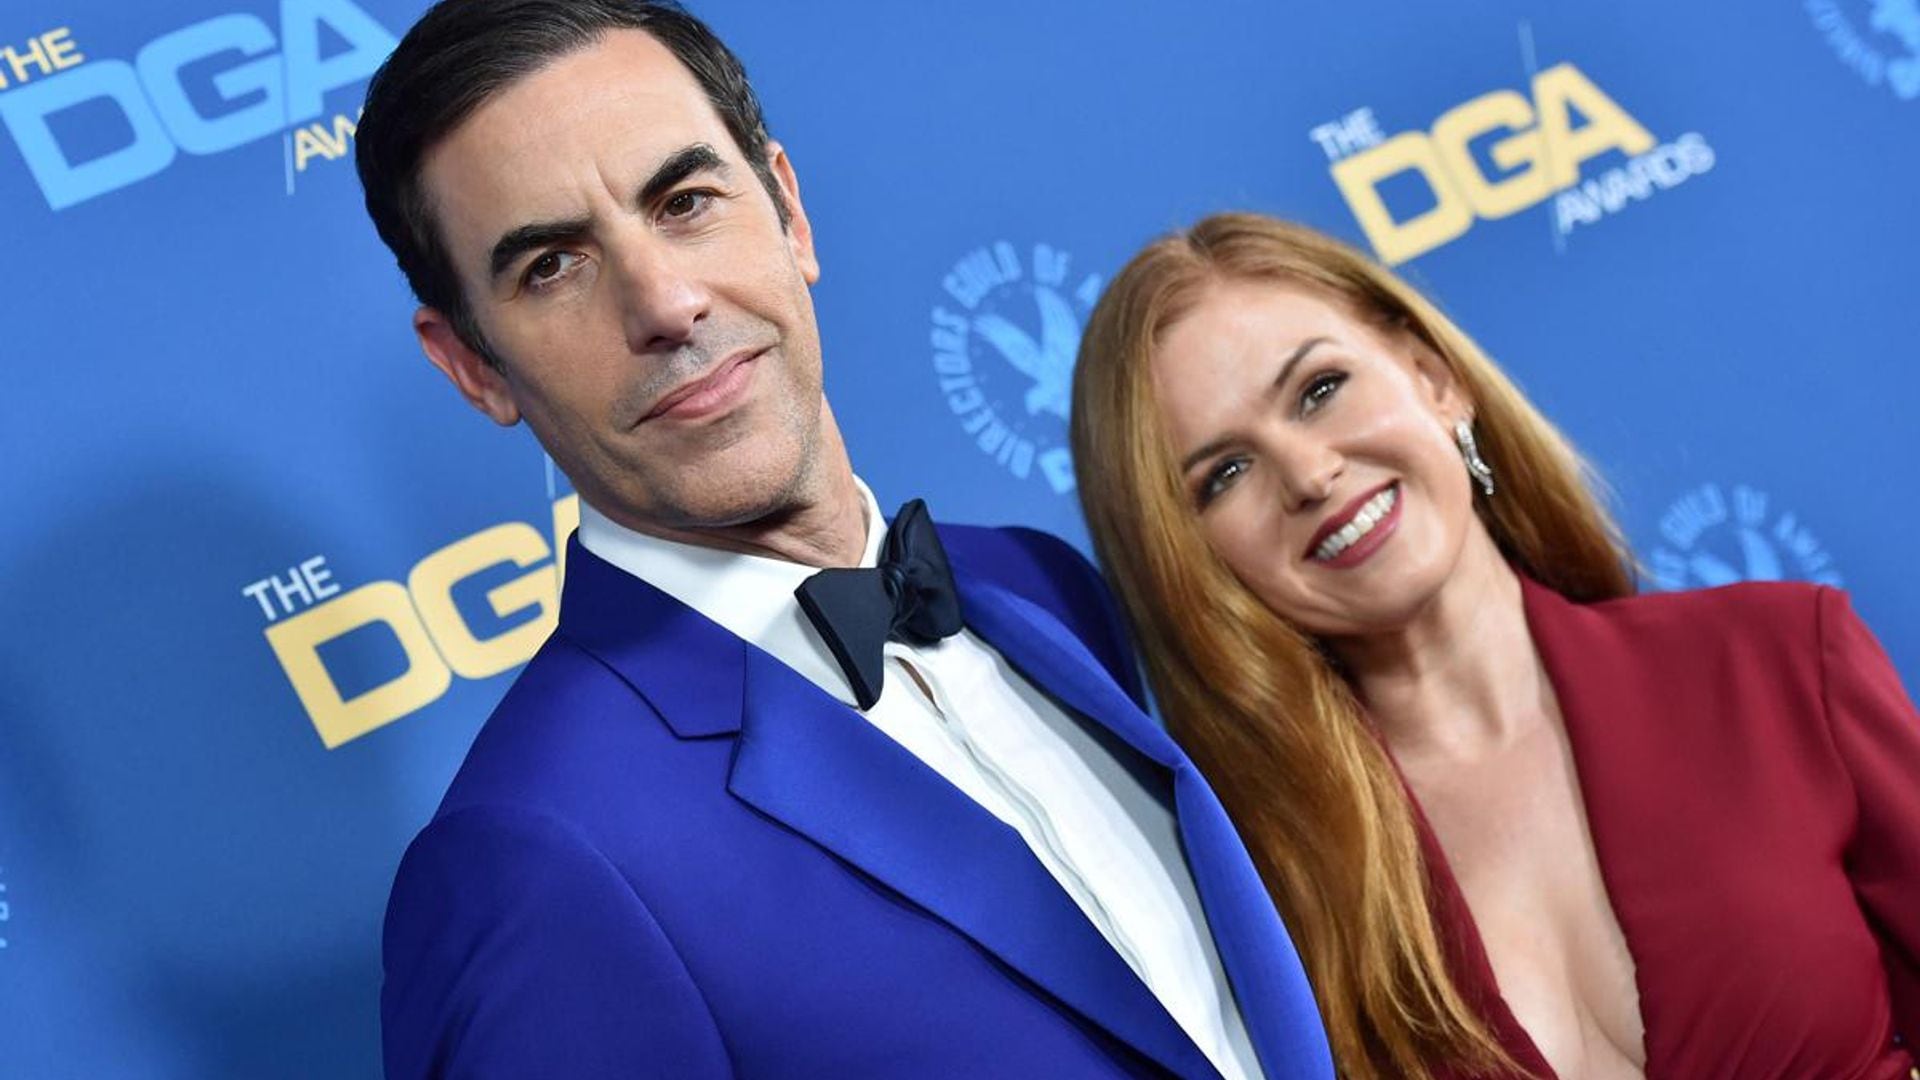 Sacha Baron Cohen and Isla Fisher: The reason for their divorce after 13 years of marriage